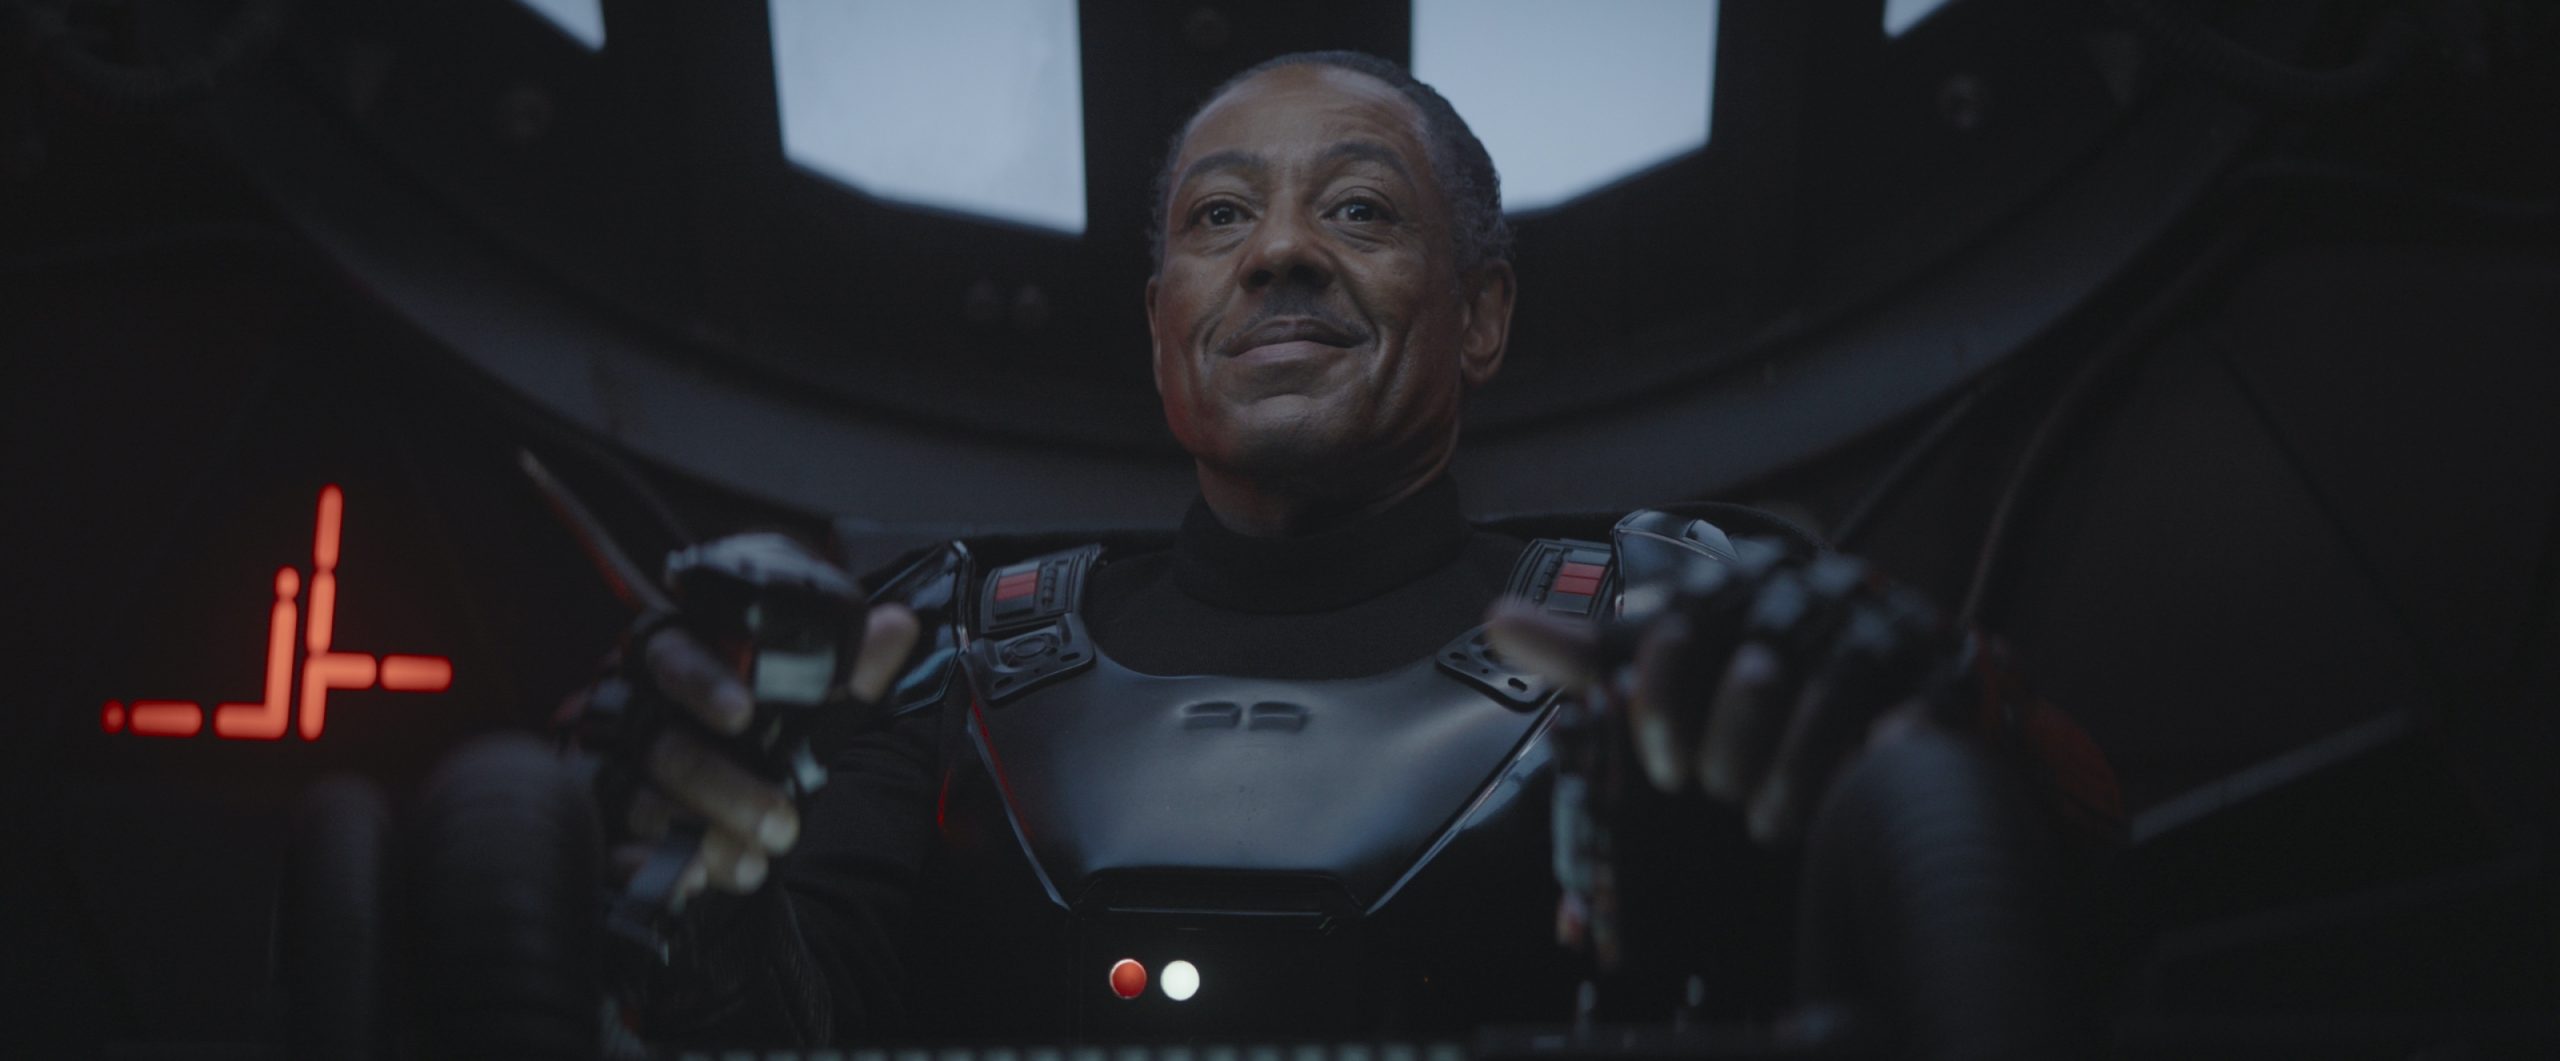 The Mandalorian: Giancarlo Esposito Explains Why The Armor Of Moff Gideon Is Reminiscent Of Darth Vader’s